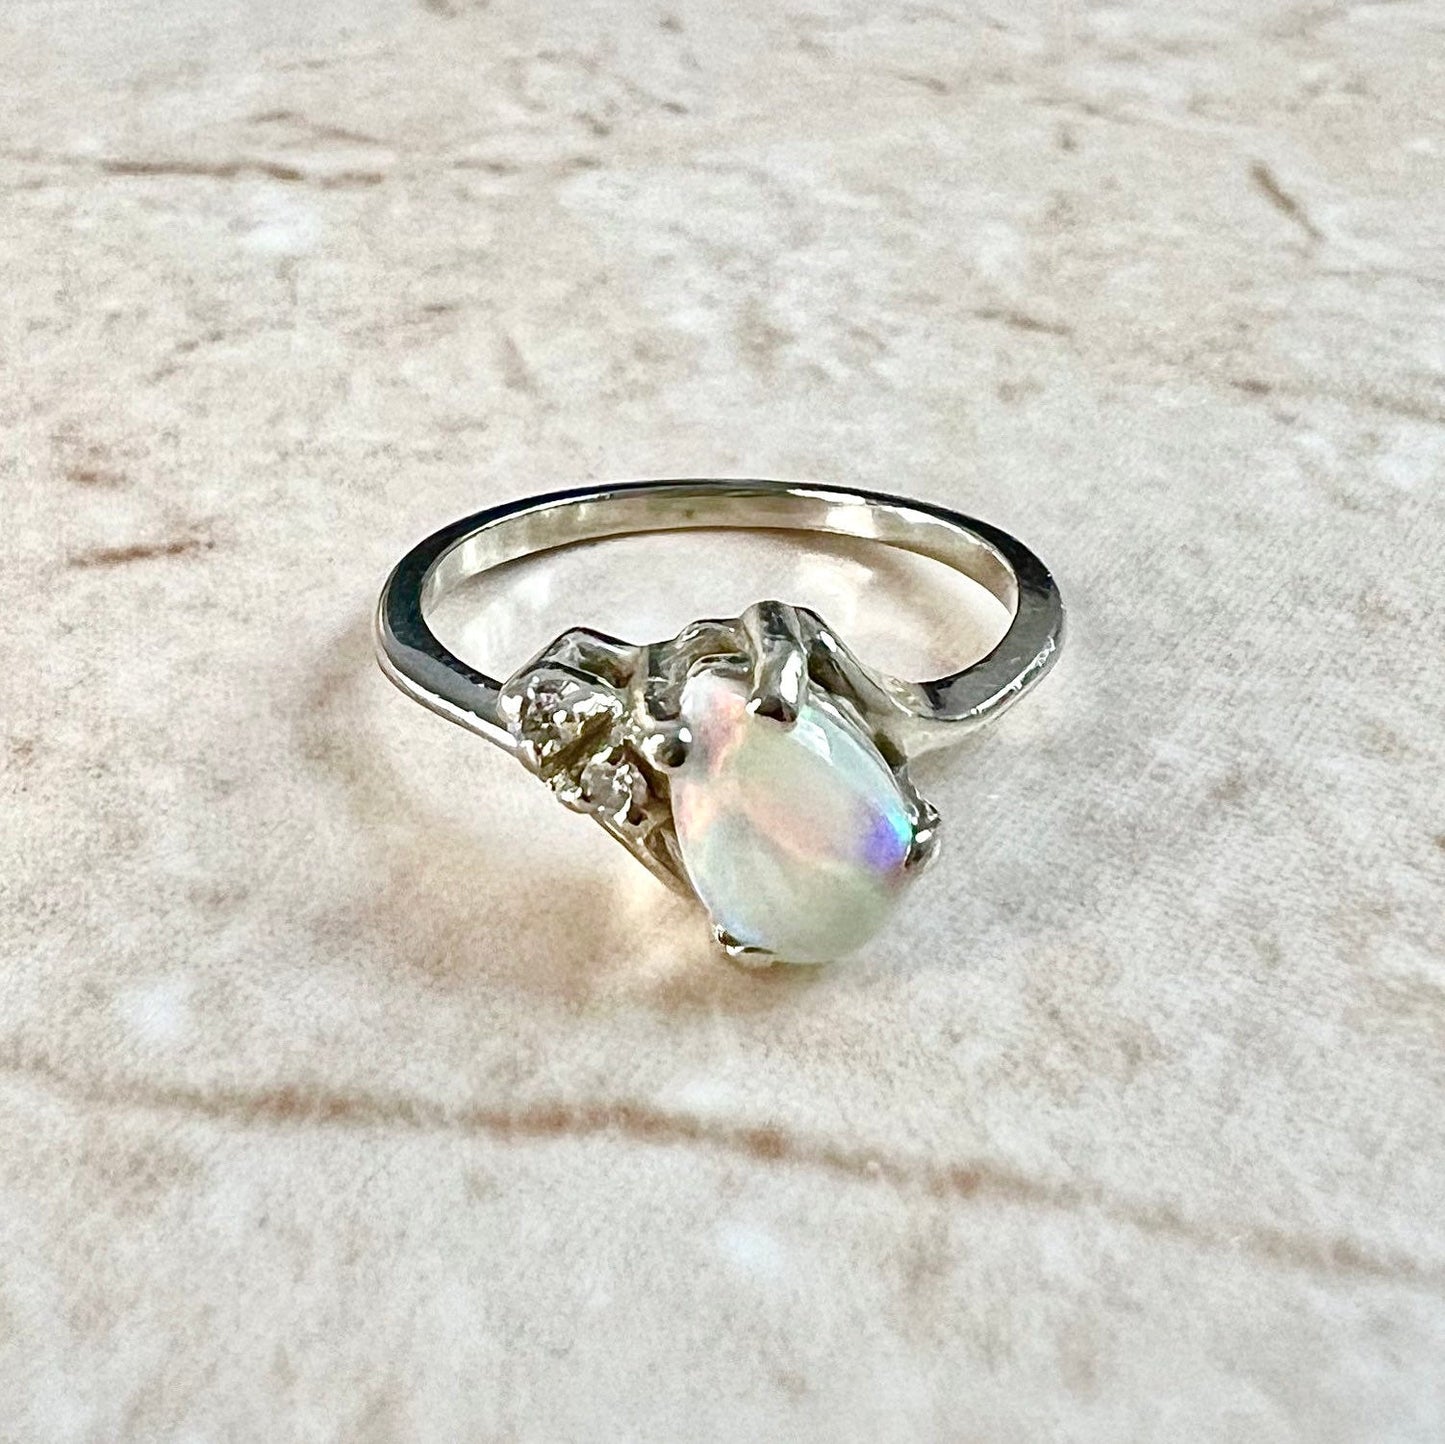 14K Diamond & Natural Opal Ring - 14K White Gold Cocktail Ring - 14K Opal Solitaire Ring - October Birthstone Ring - Birthday Gift